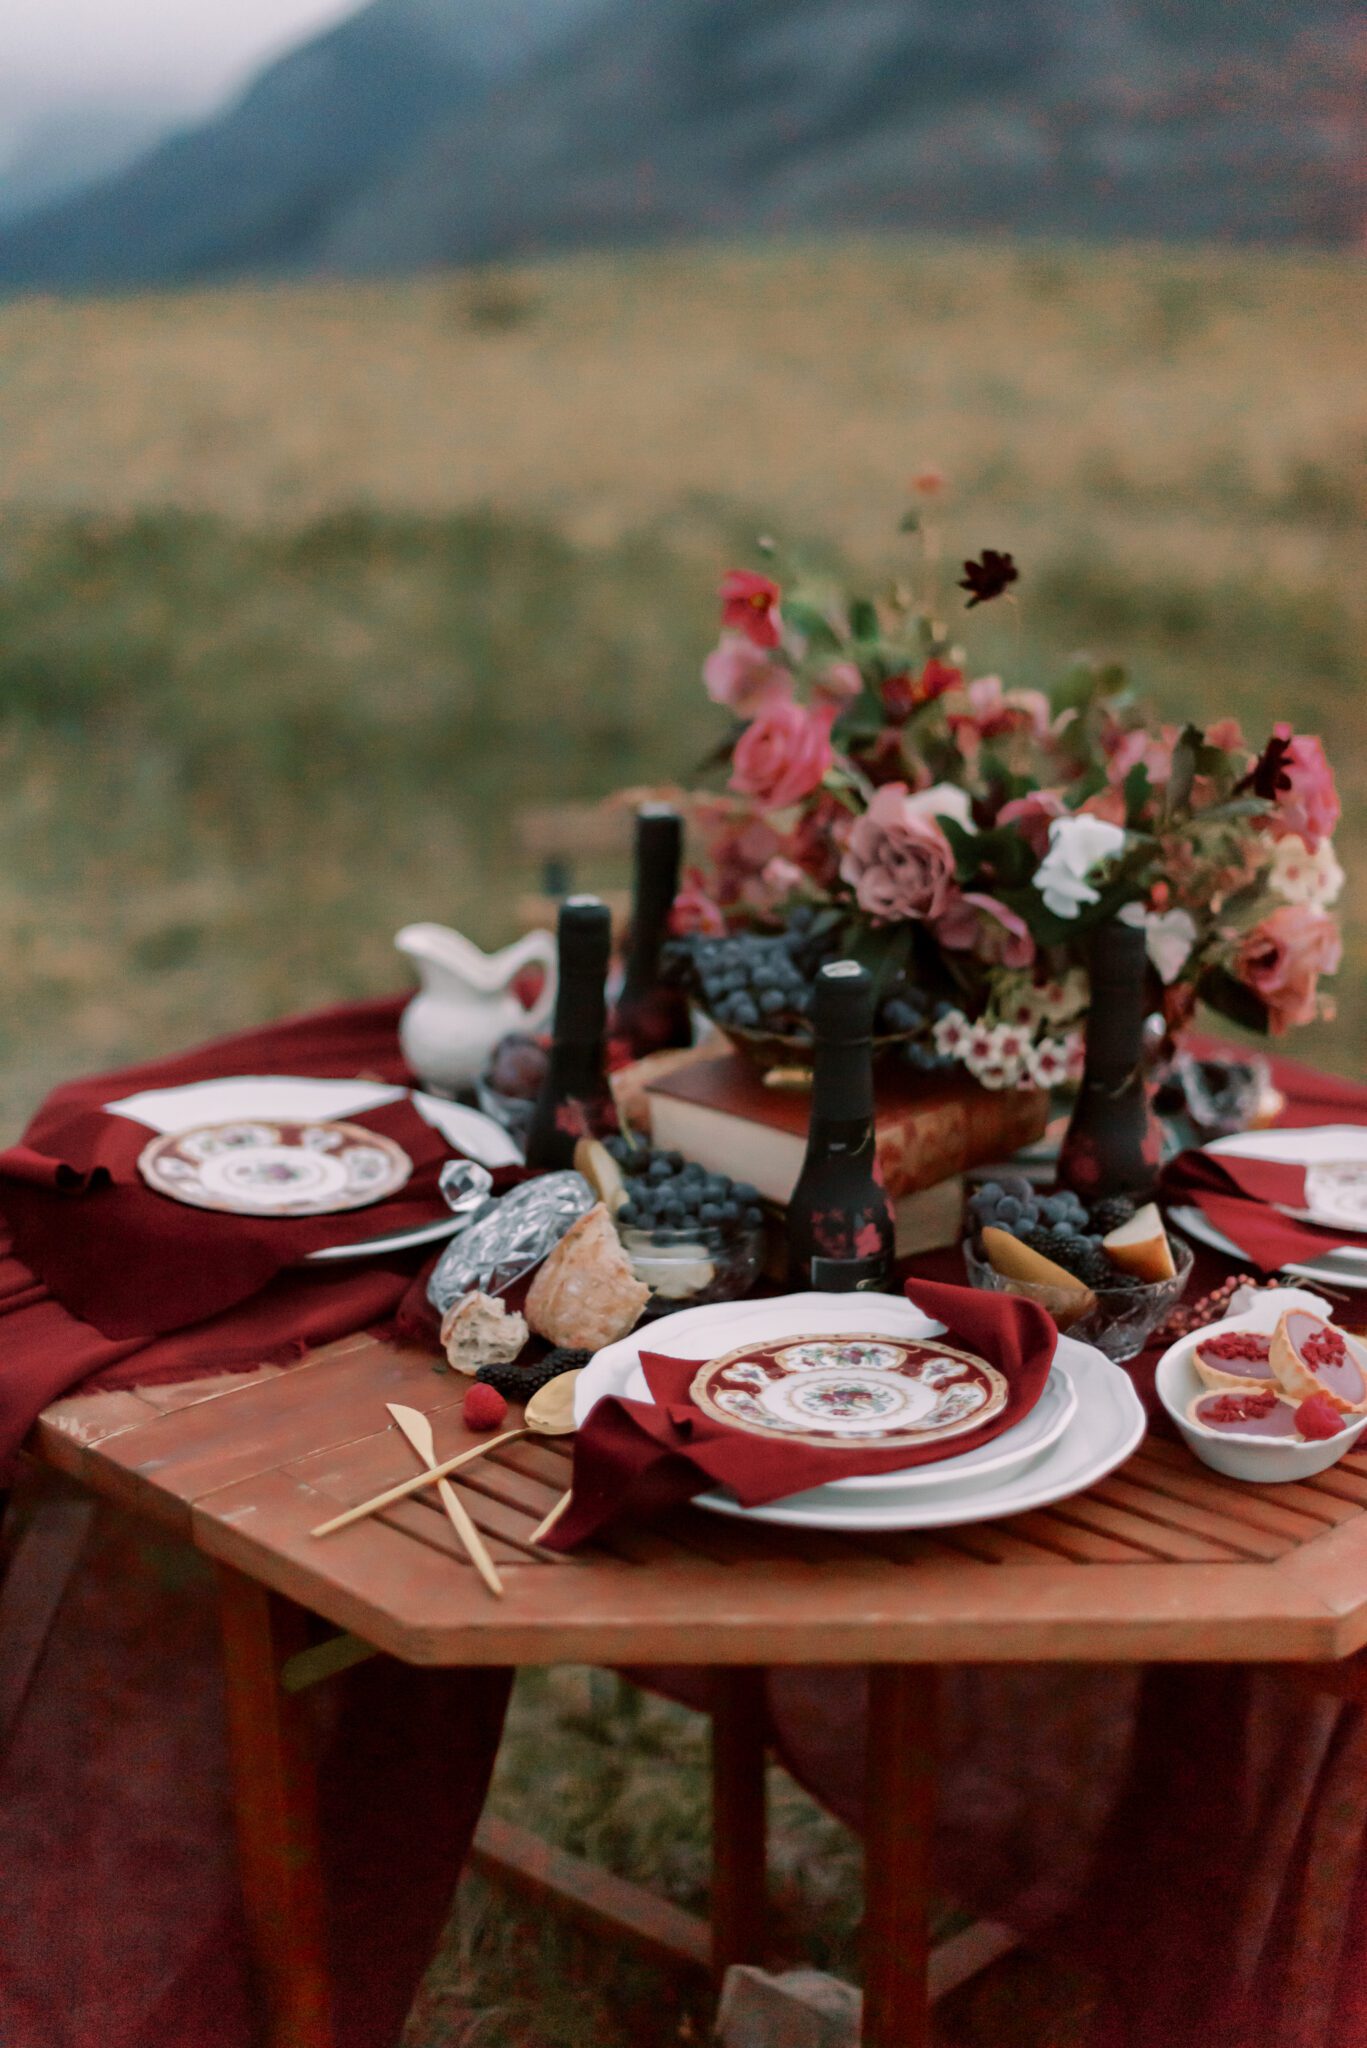 Intimate table setting outdoors in Waterton Alberta, Fall Wedding Inspiration, Merlot and berry toned  florals by Alexandra Victoria Rose, desserts by Lemonberry Pastries